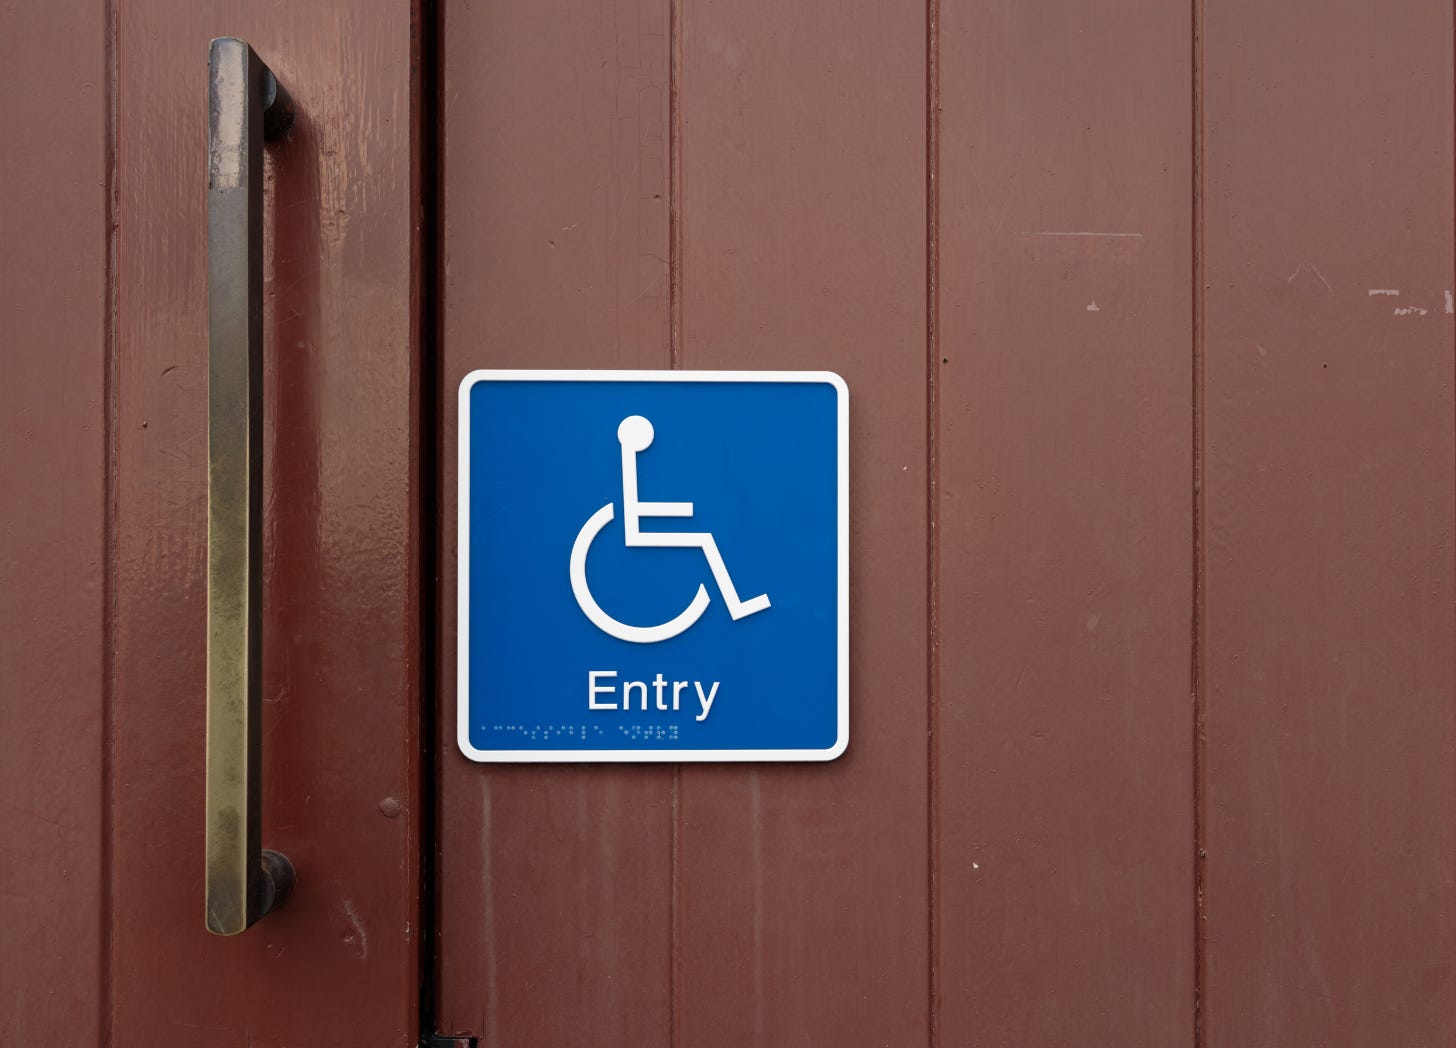 Wheelchair symbol sign reading "Entry" mounted on a door.